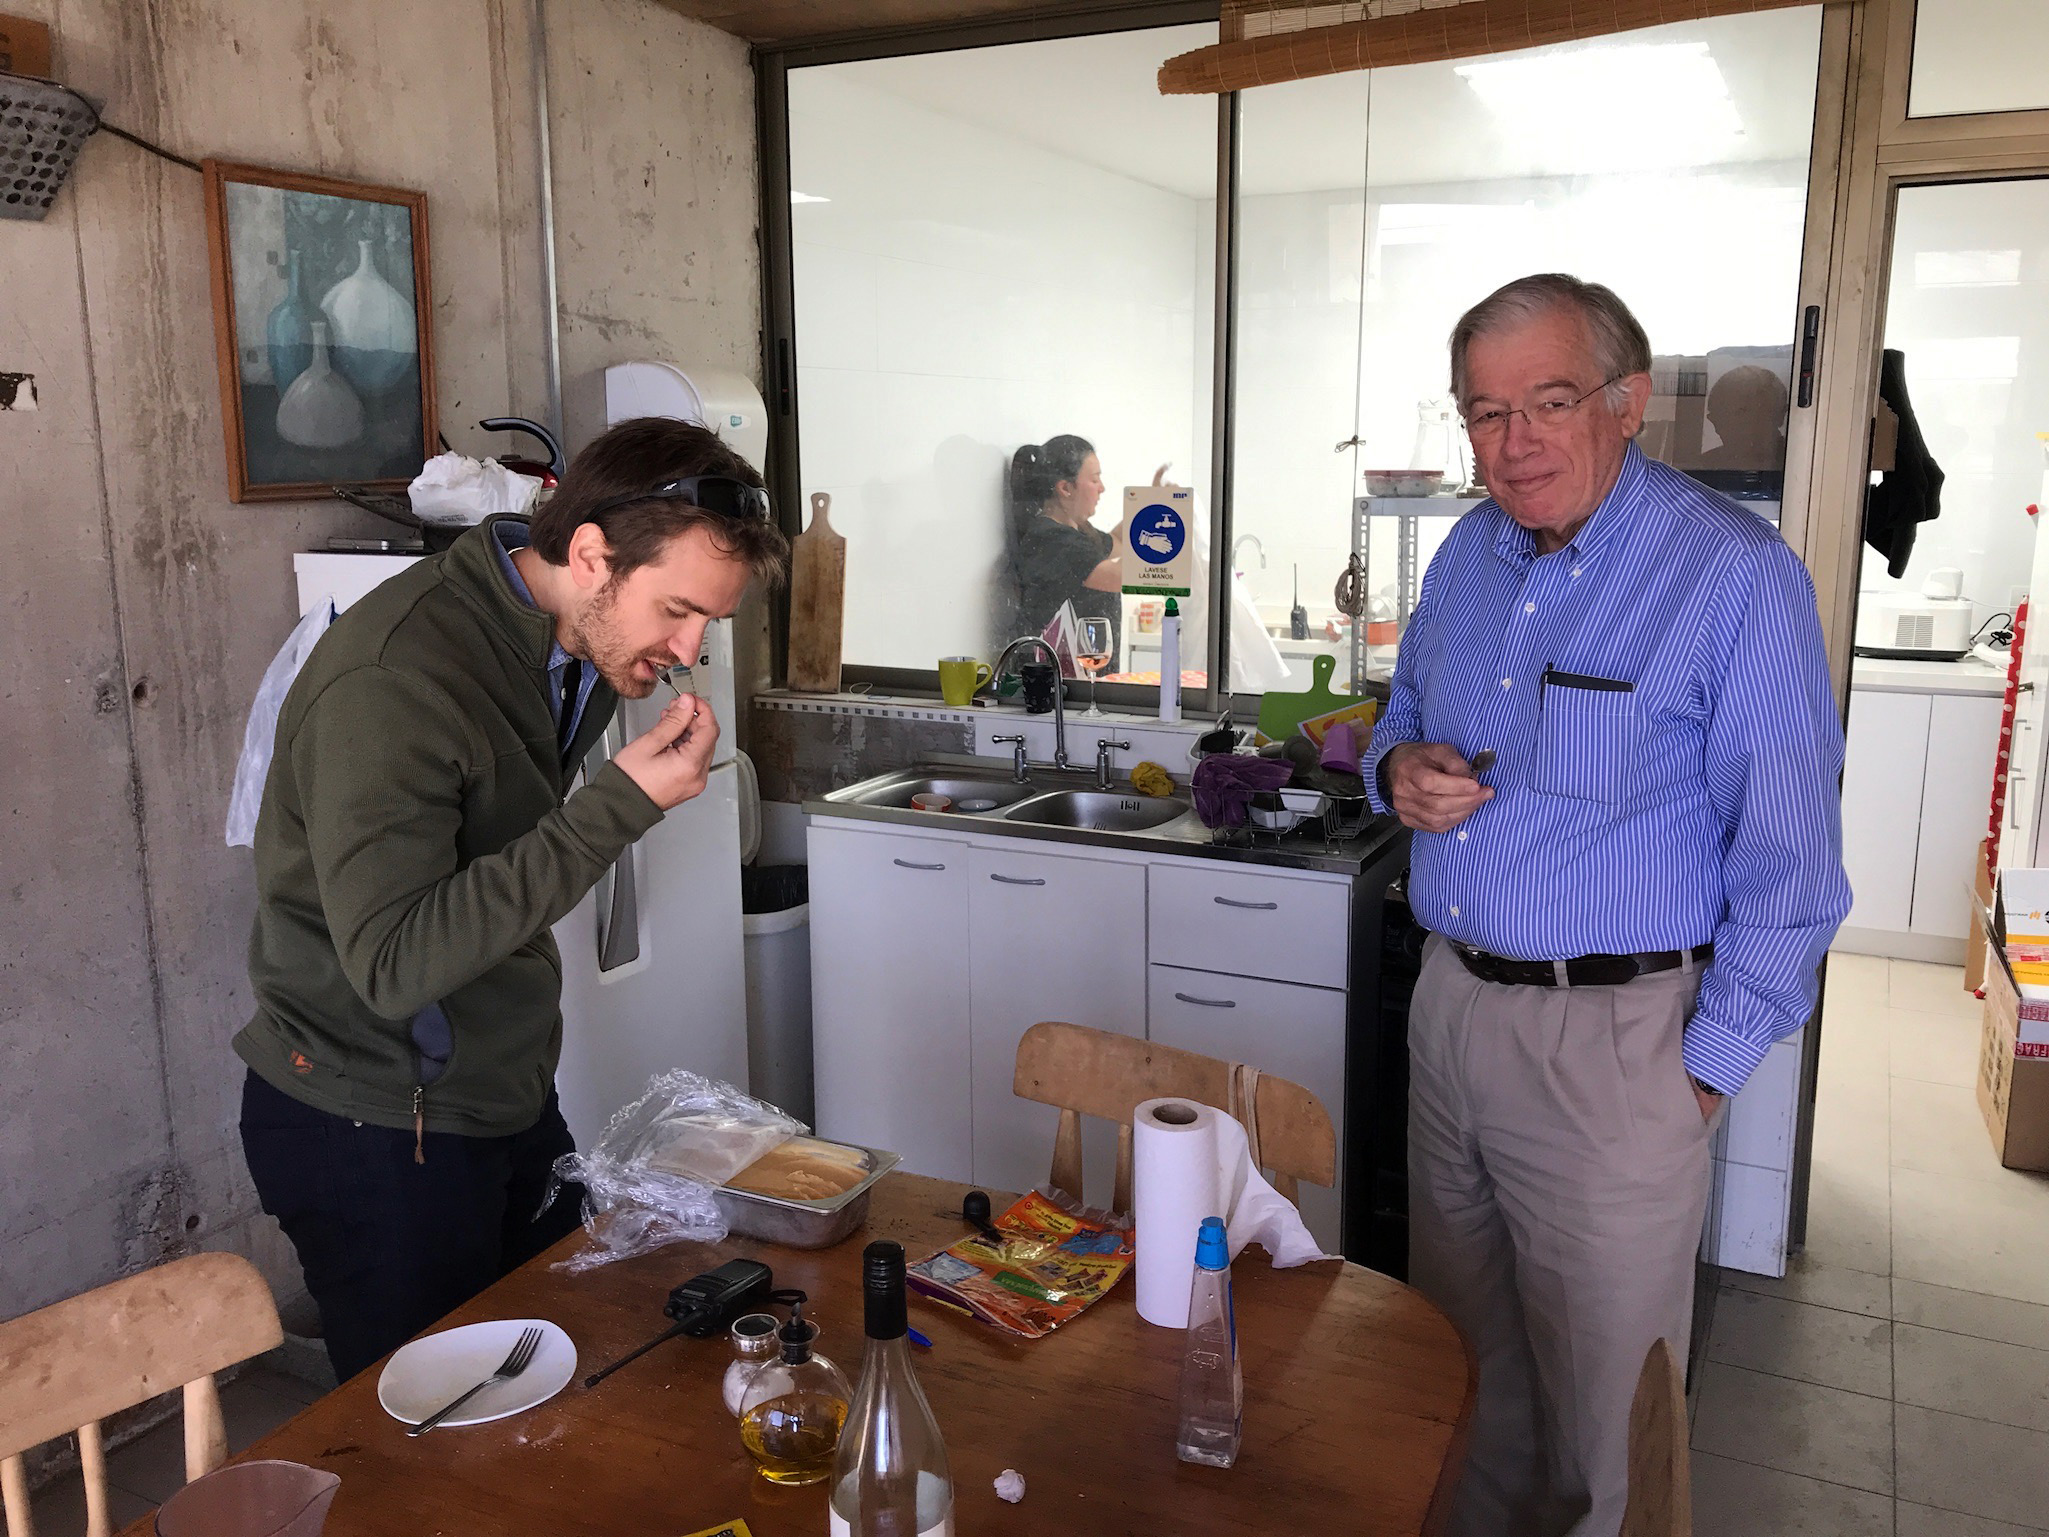 Amael and my Dad, Michael Kingston, sample homemade salted caramel ice cream in the staff kitchen.